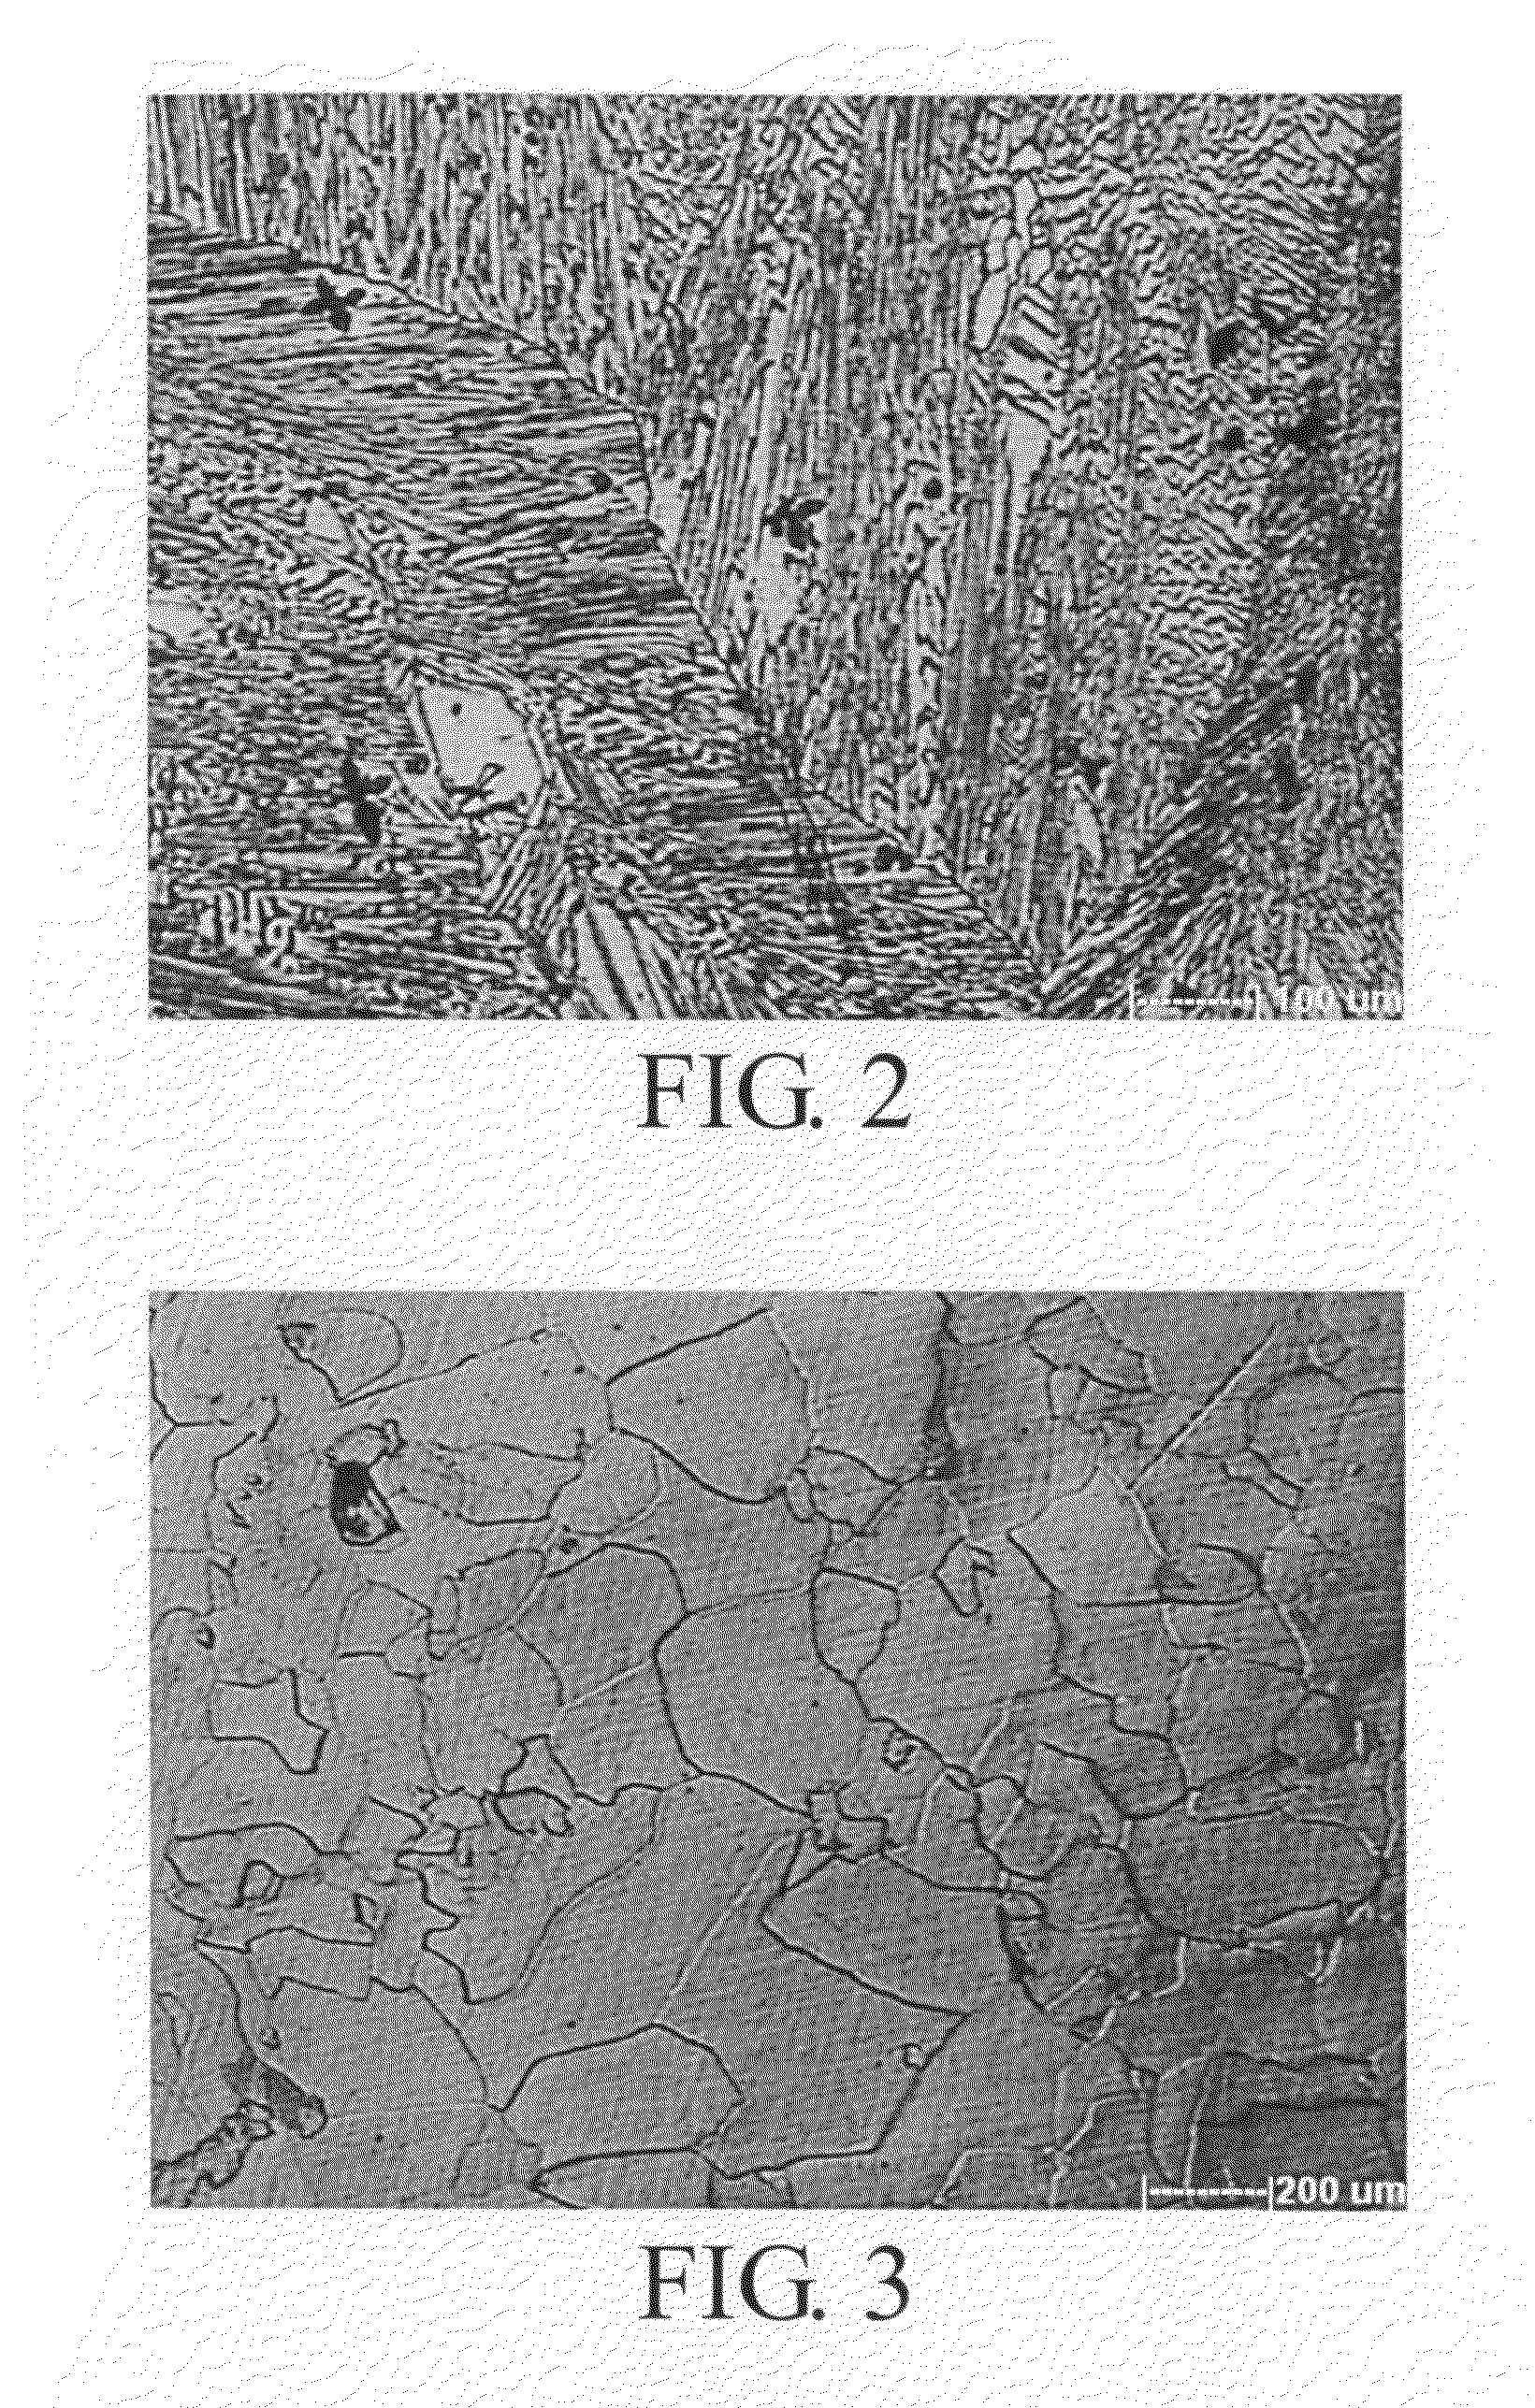 Copper-gallium allay sputtering target, method for fabricating the same and related applications